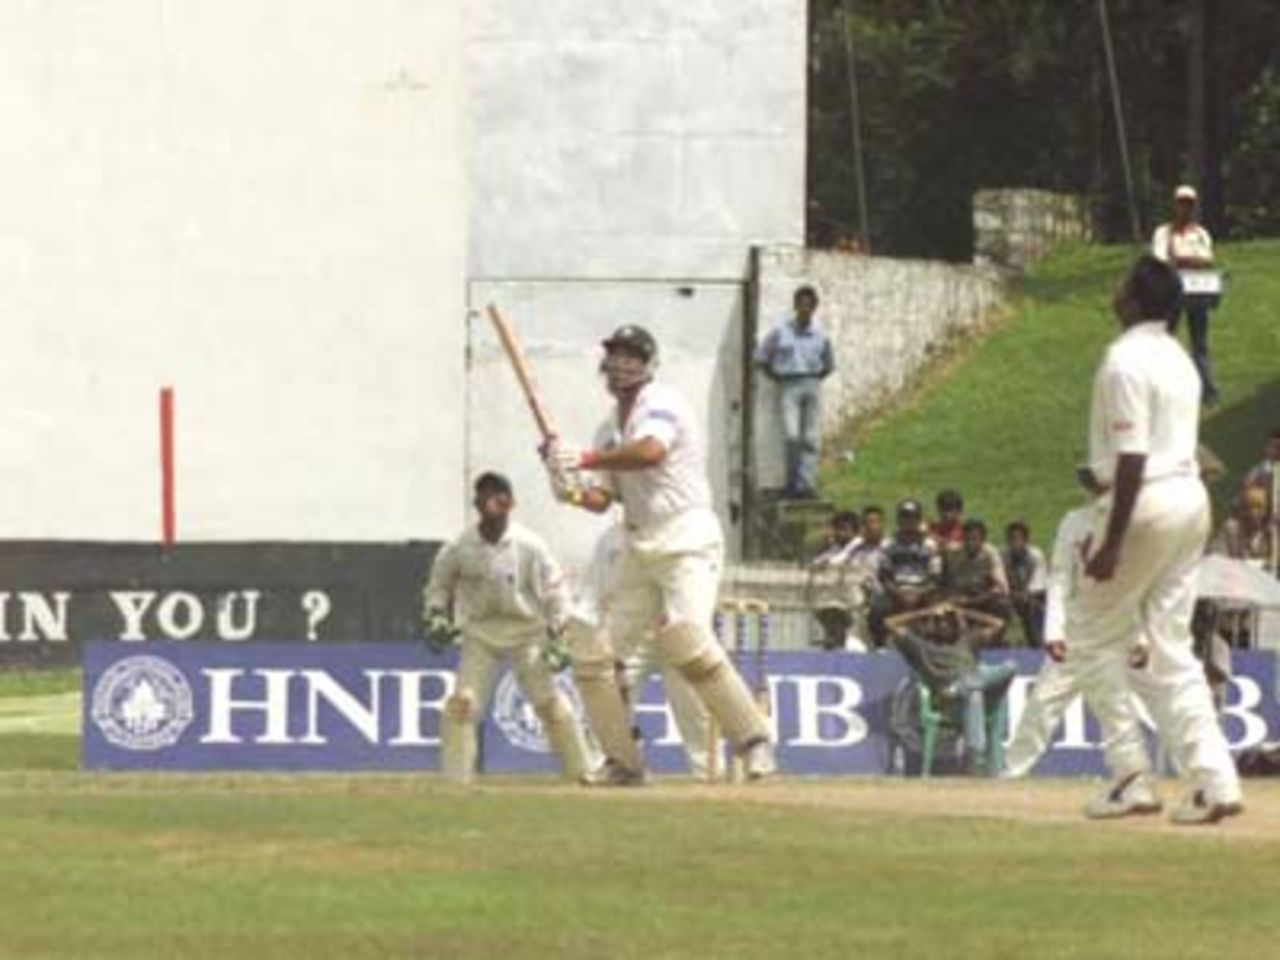 Wasim top edges just short of Ranatunga on the third day of the First Test, 16 June, 2000. Pakistan in Sri Lanka, Sinhalese Sports Club Ground, Colombo, 14-18 June 2000